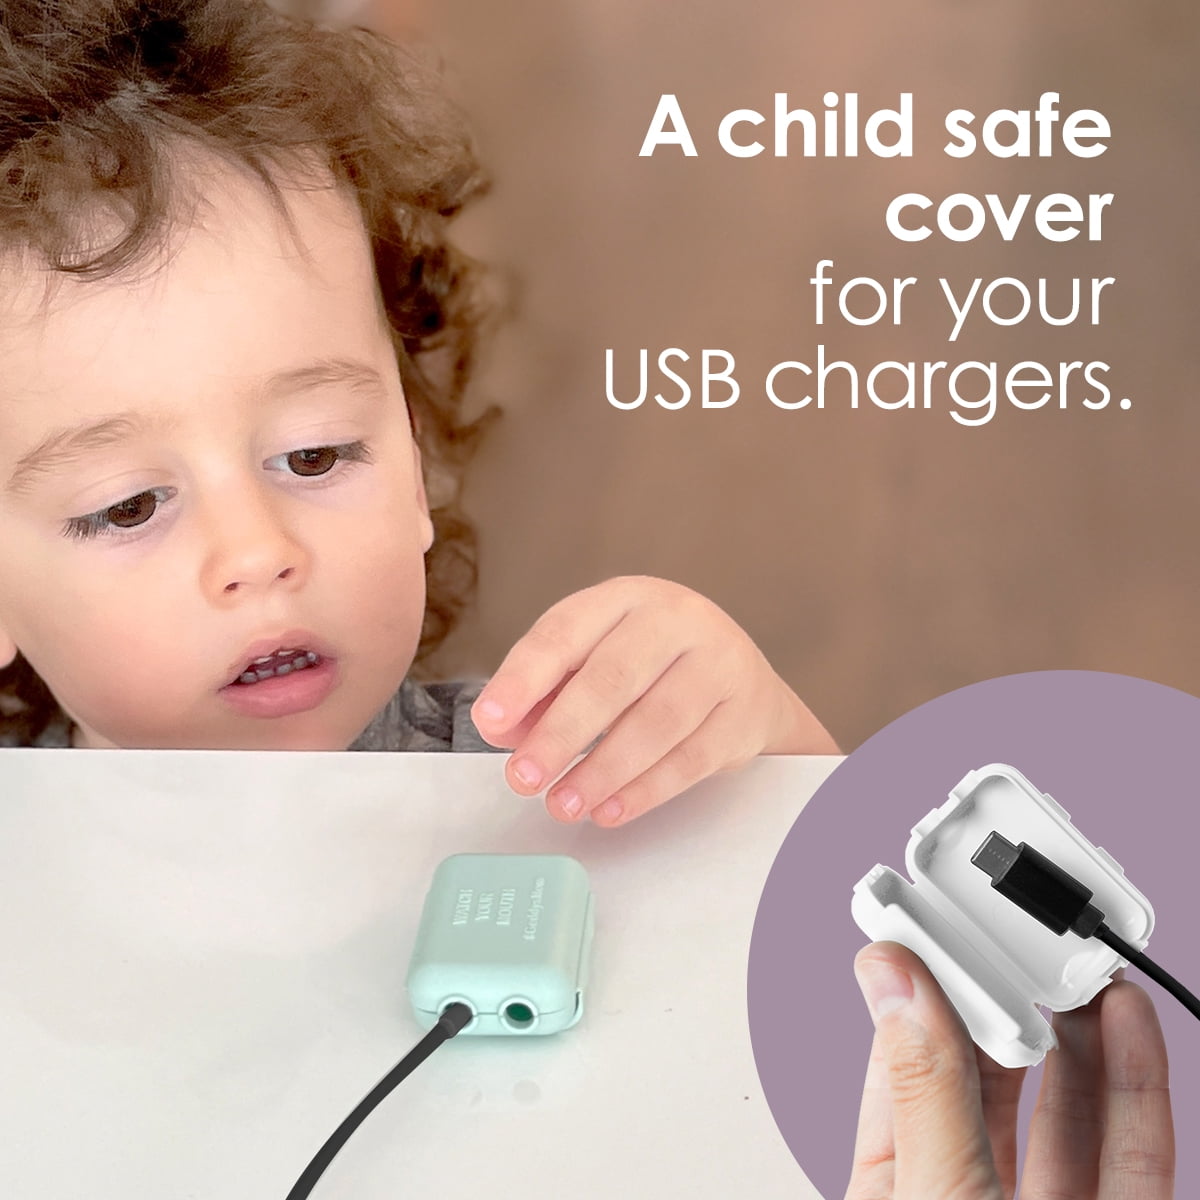 USB Charge Cord Safety Cover. New Kid Kap Baby Proofing USB